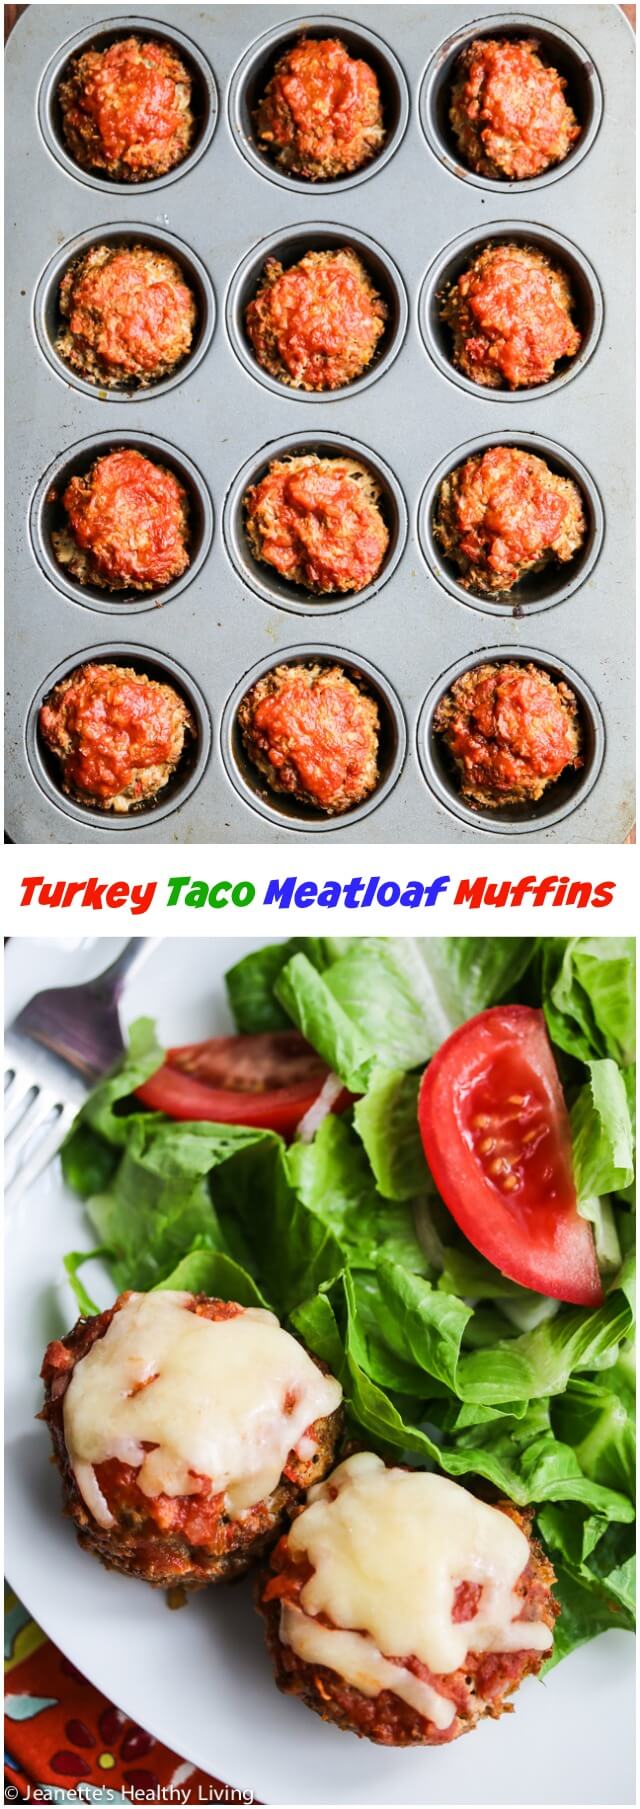 Turkey Taco Meatloaf Muffins - super kid-friendly, delicious, nutritious and they reheat really well